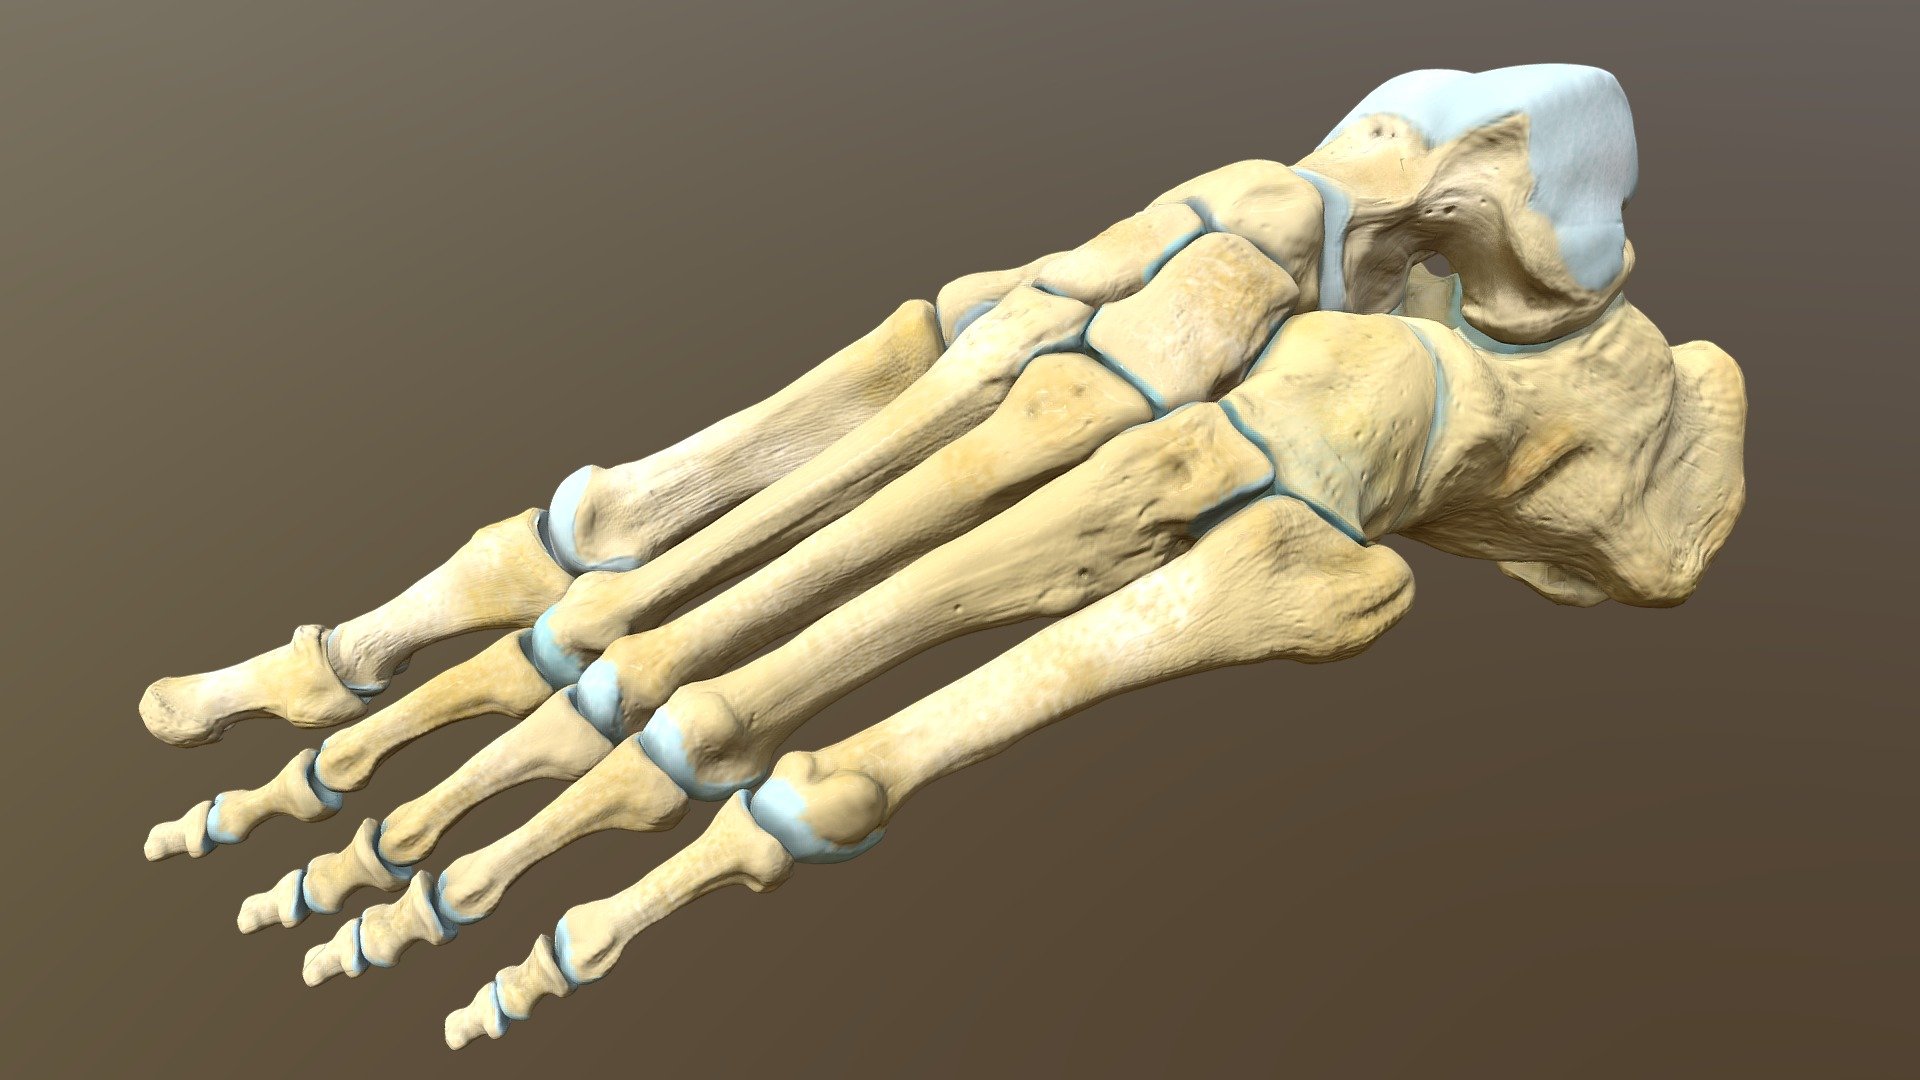 A highly anatomically accurate model of the bones of the left foot. CT data and modelling from real human bones was used to create each individual foot bone.
The skeletal anatomy is divided into the tarsus, metatarsus and the forefoot or phalanges 3d model